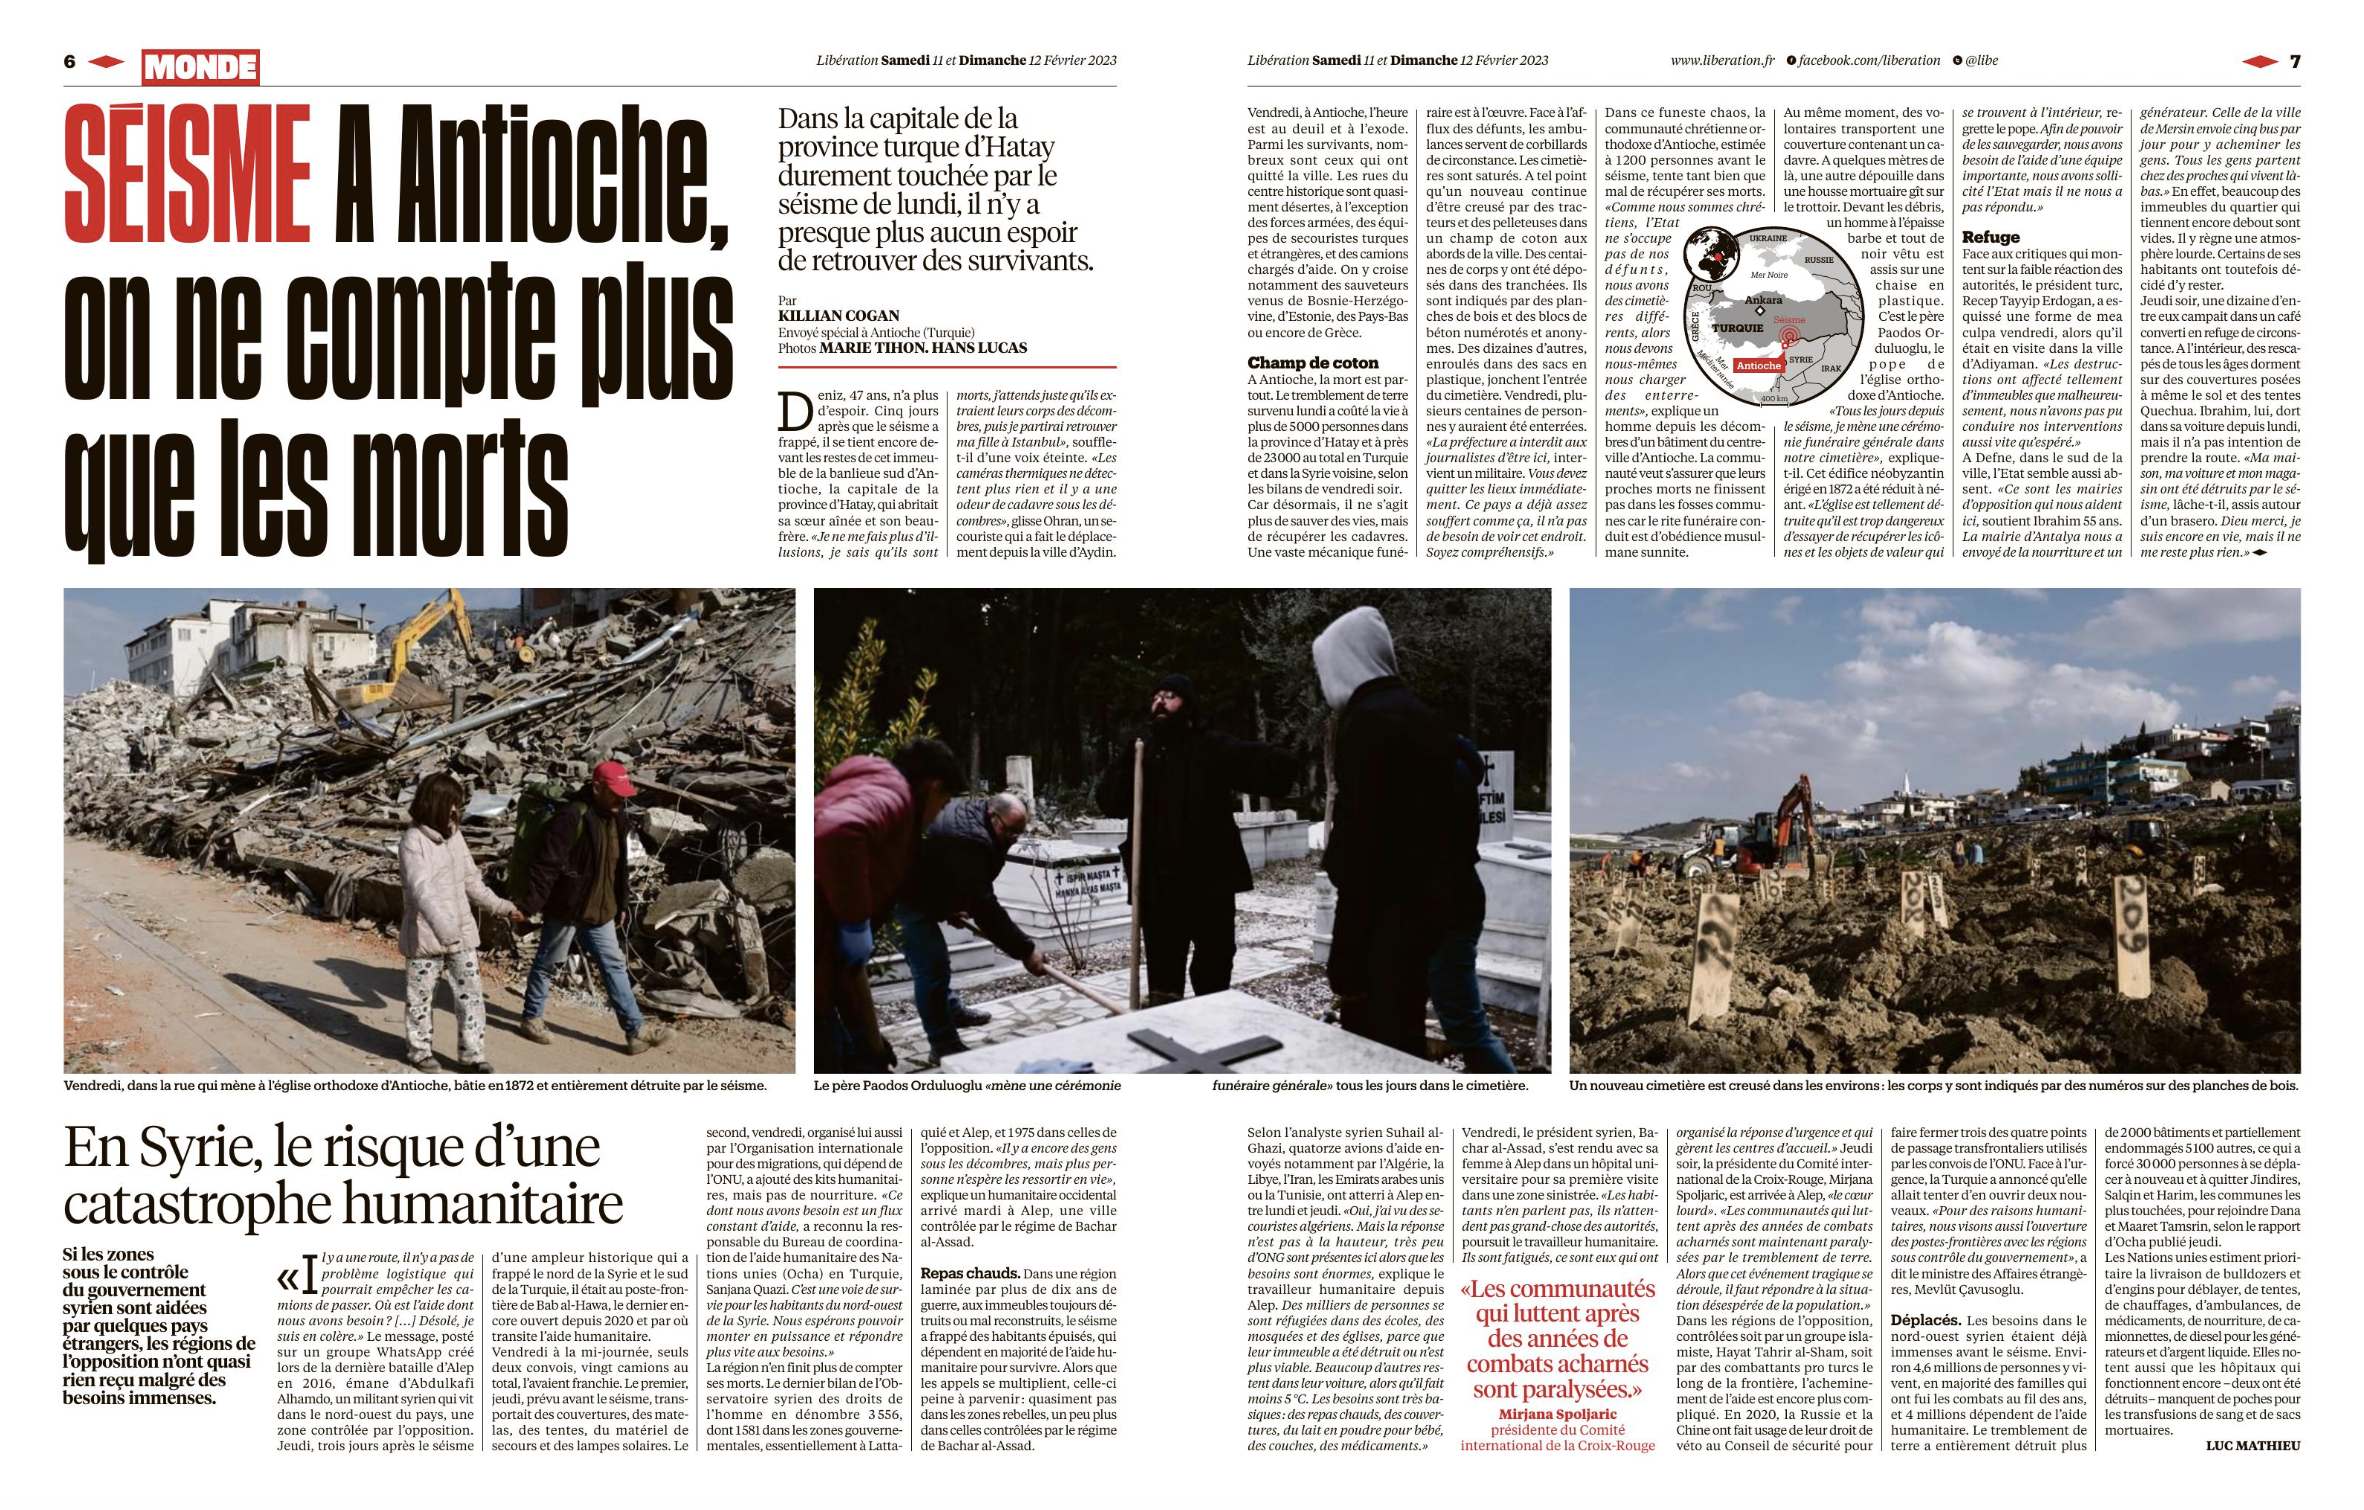 Image from Publications - Assignment for Libération